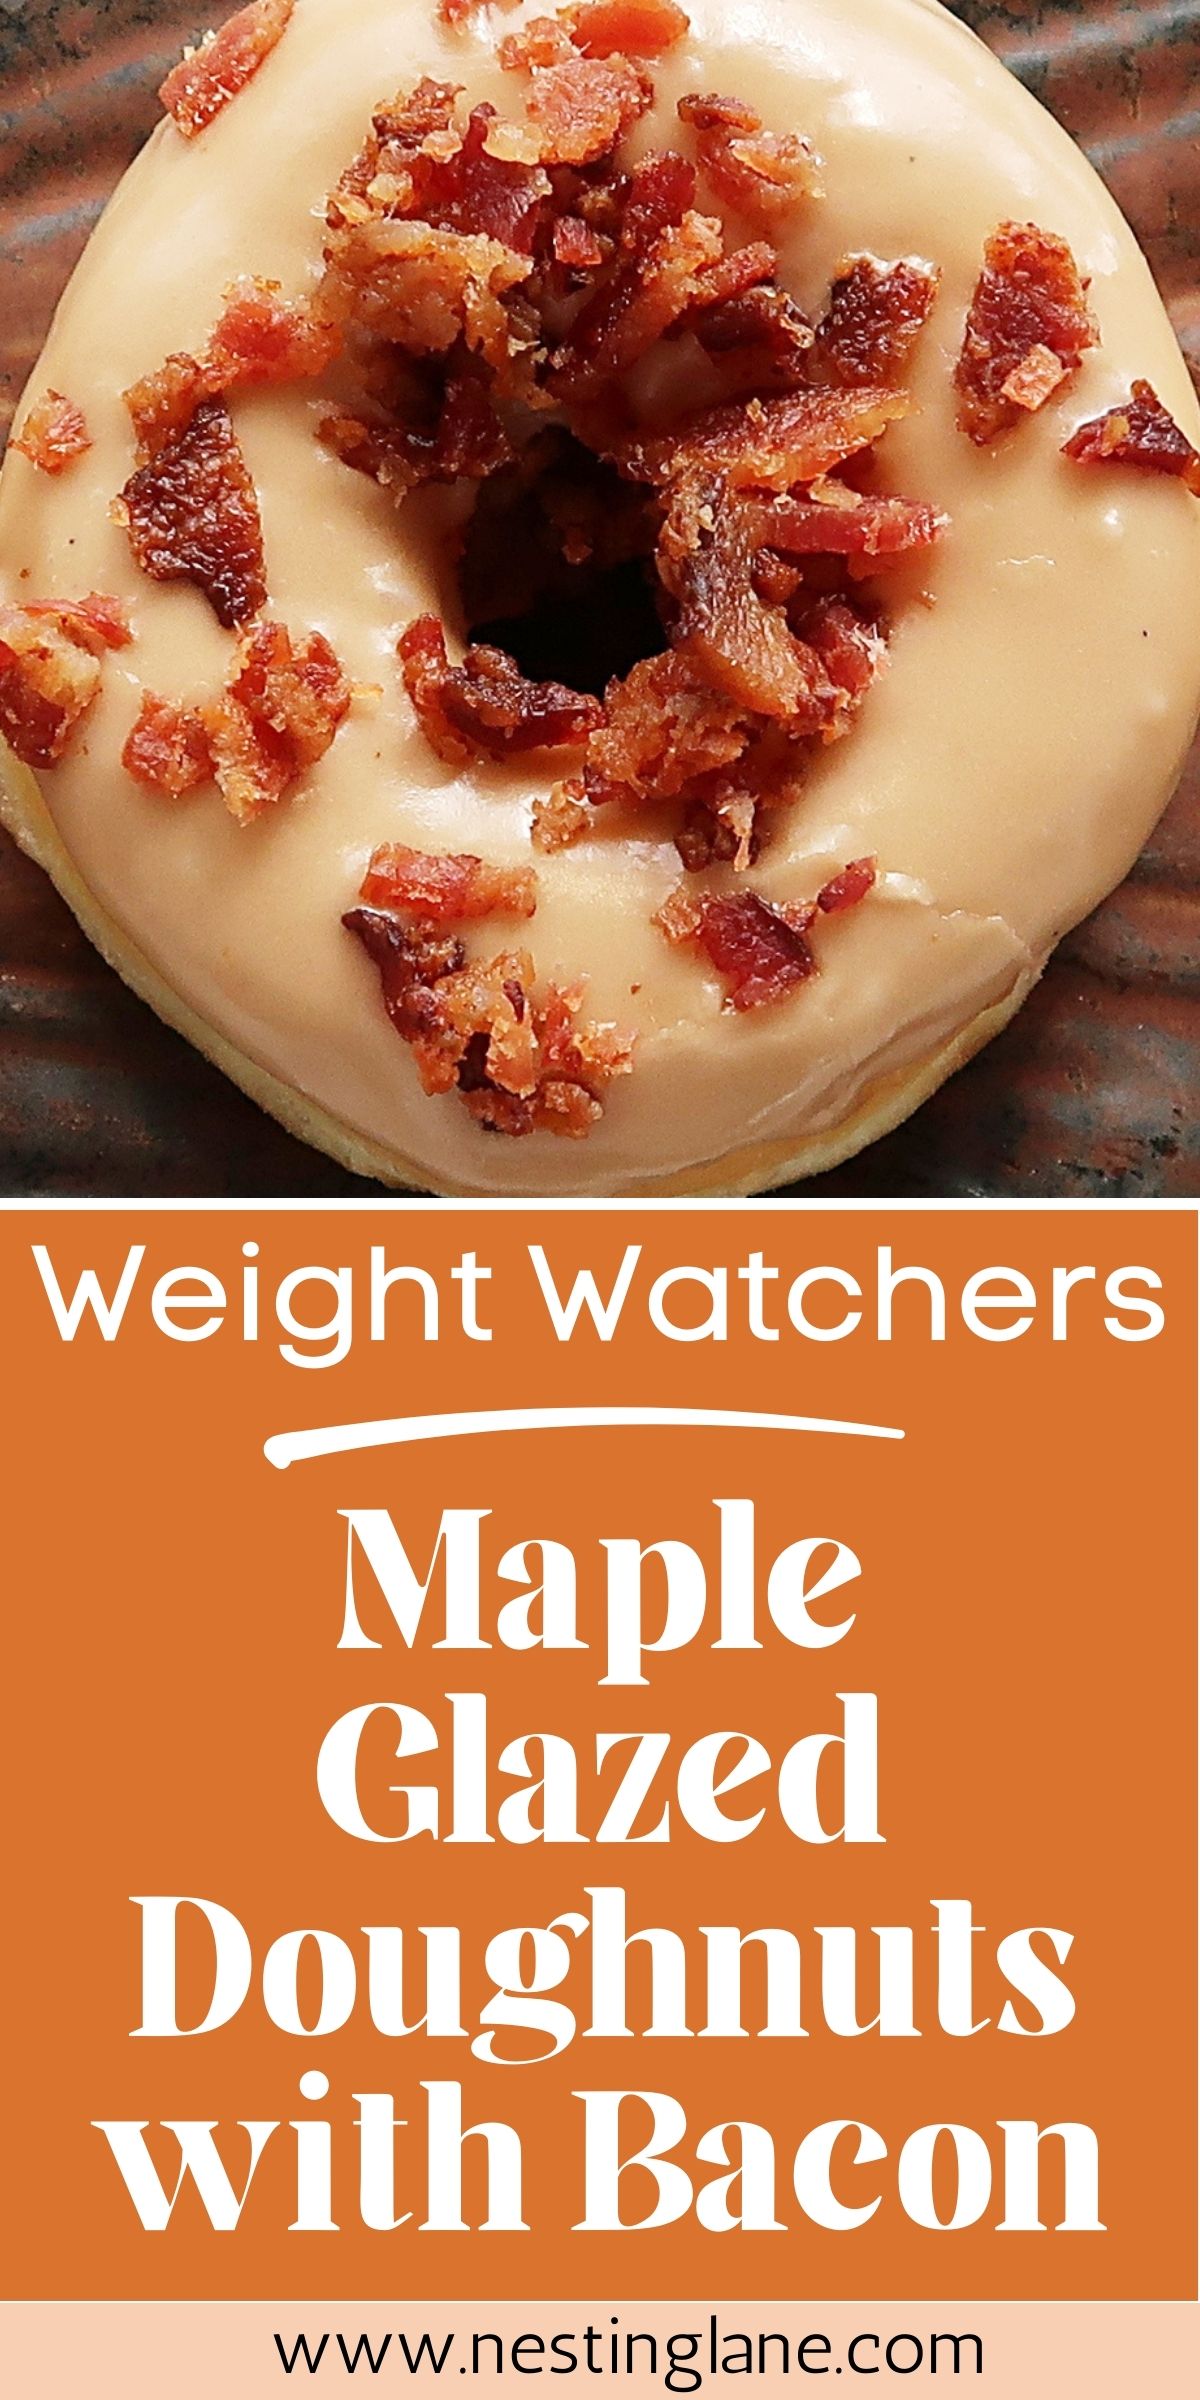 Graphic for Pinterest of Weight Watchers Maple Glazed Doughnuts with Bacon Recipe.